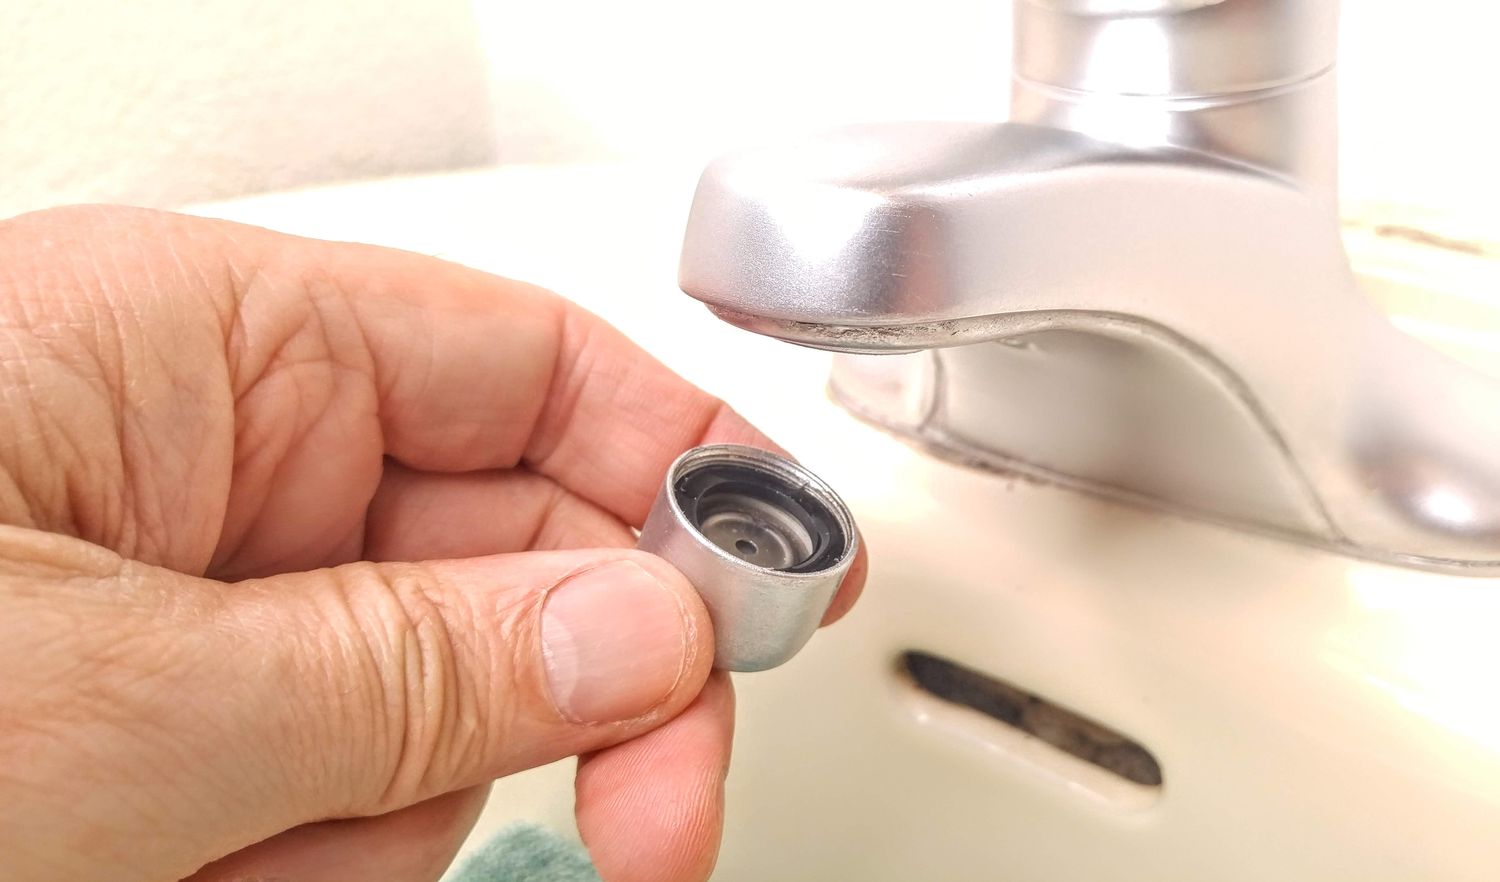 How To Remove Recessed Faucet Aerator Without Key - Blog - 1